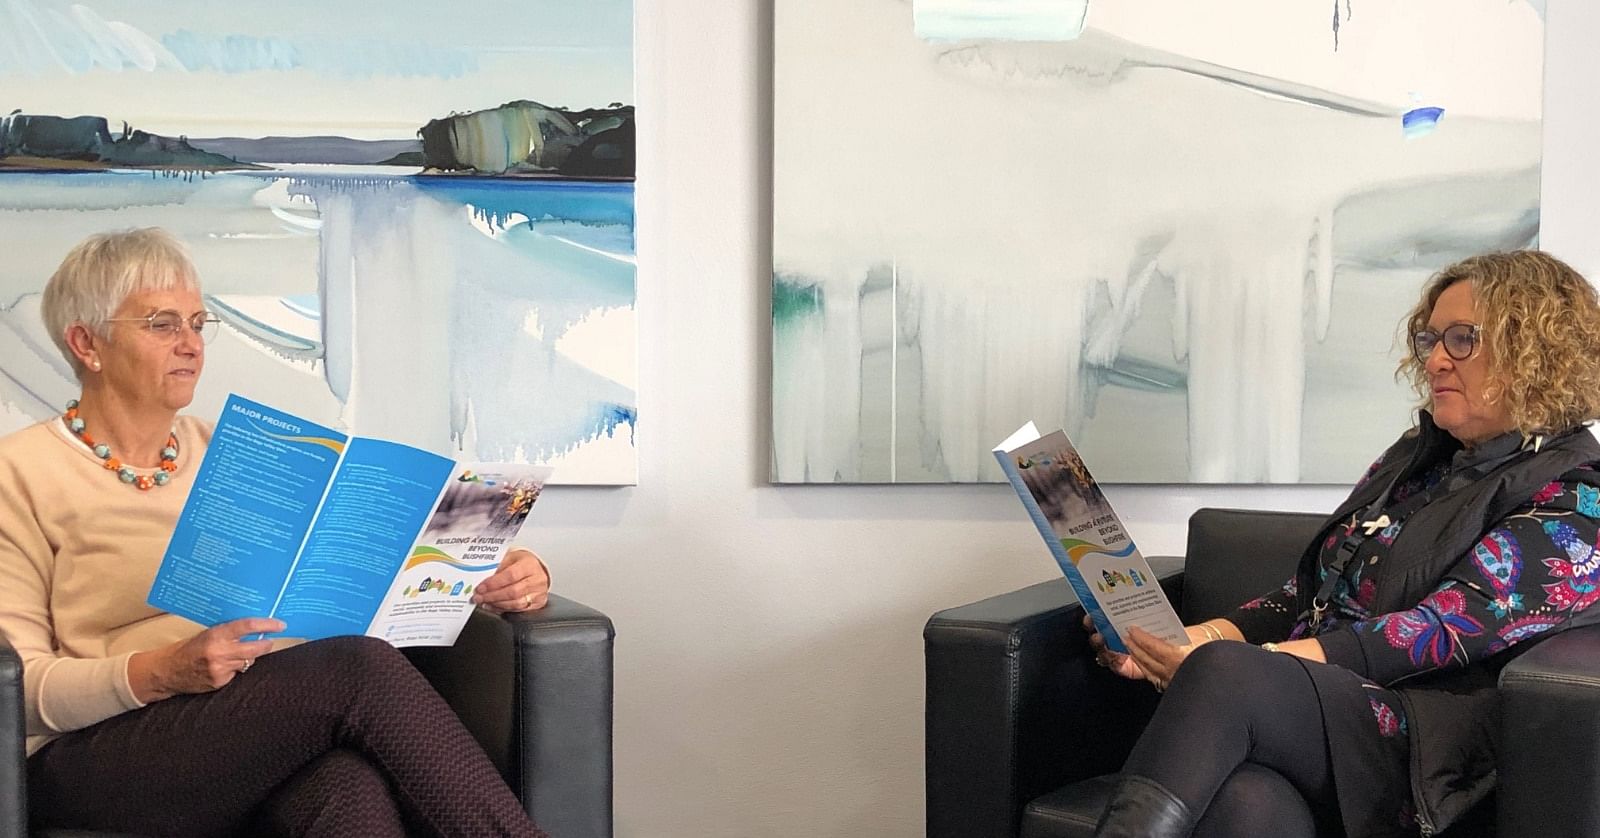 General Manager Leanne Barnes and Mayor Sharon Tapscott reviewing the 'Building a future beyond bushfire' brochure.